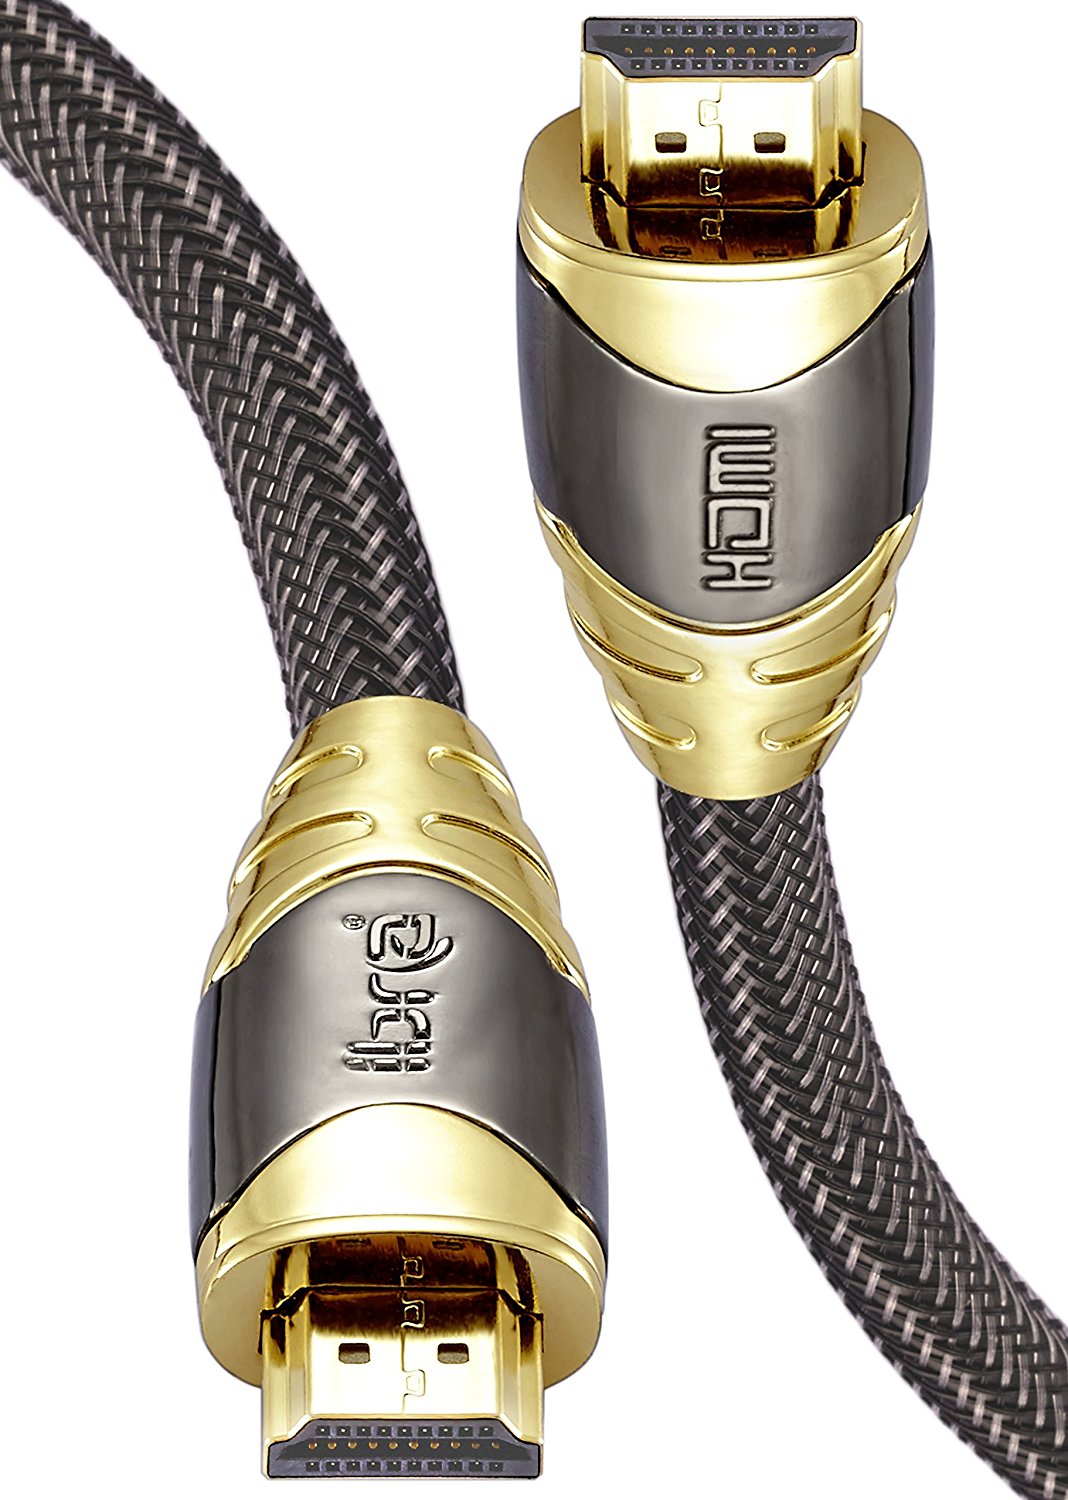 HDMI Cable 20M - HDMI 2.0 (4K) Ready - 28AWG Braided Cord - 18Gbps -Gold Plated Connectors - Ethernet, Audio Return - Video 4K 2160p HD 1080p 3D Xbox PlayStation PS3 PS4 PC Apple TV – IBRA LUXURY